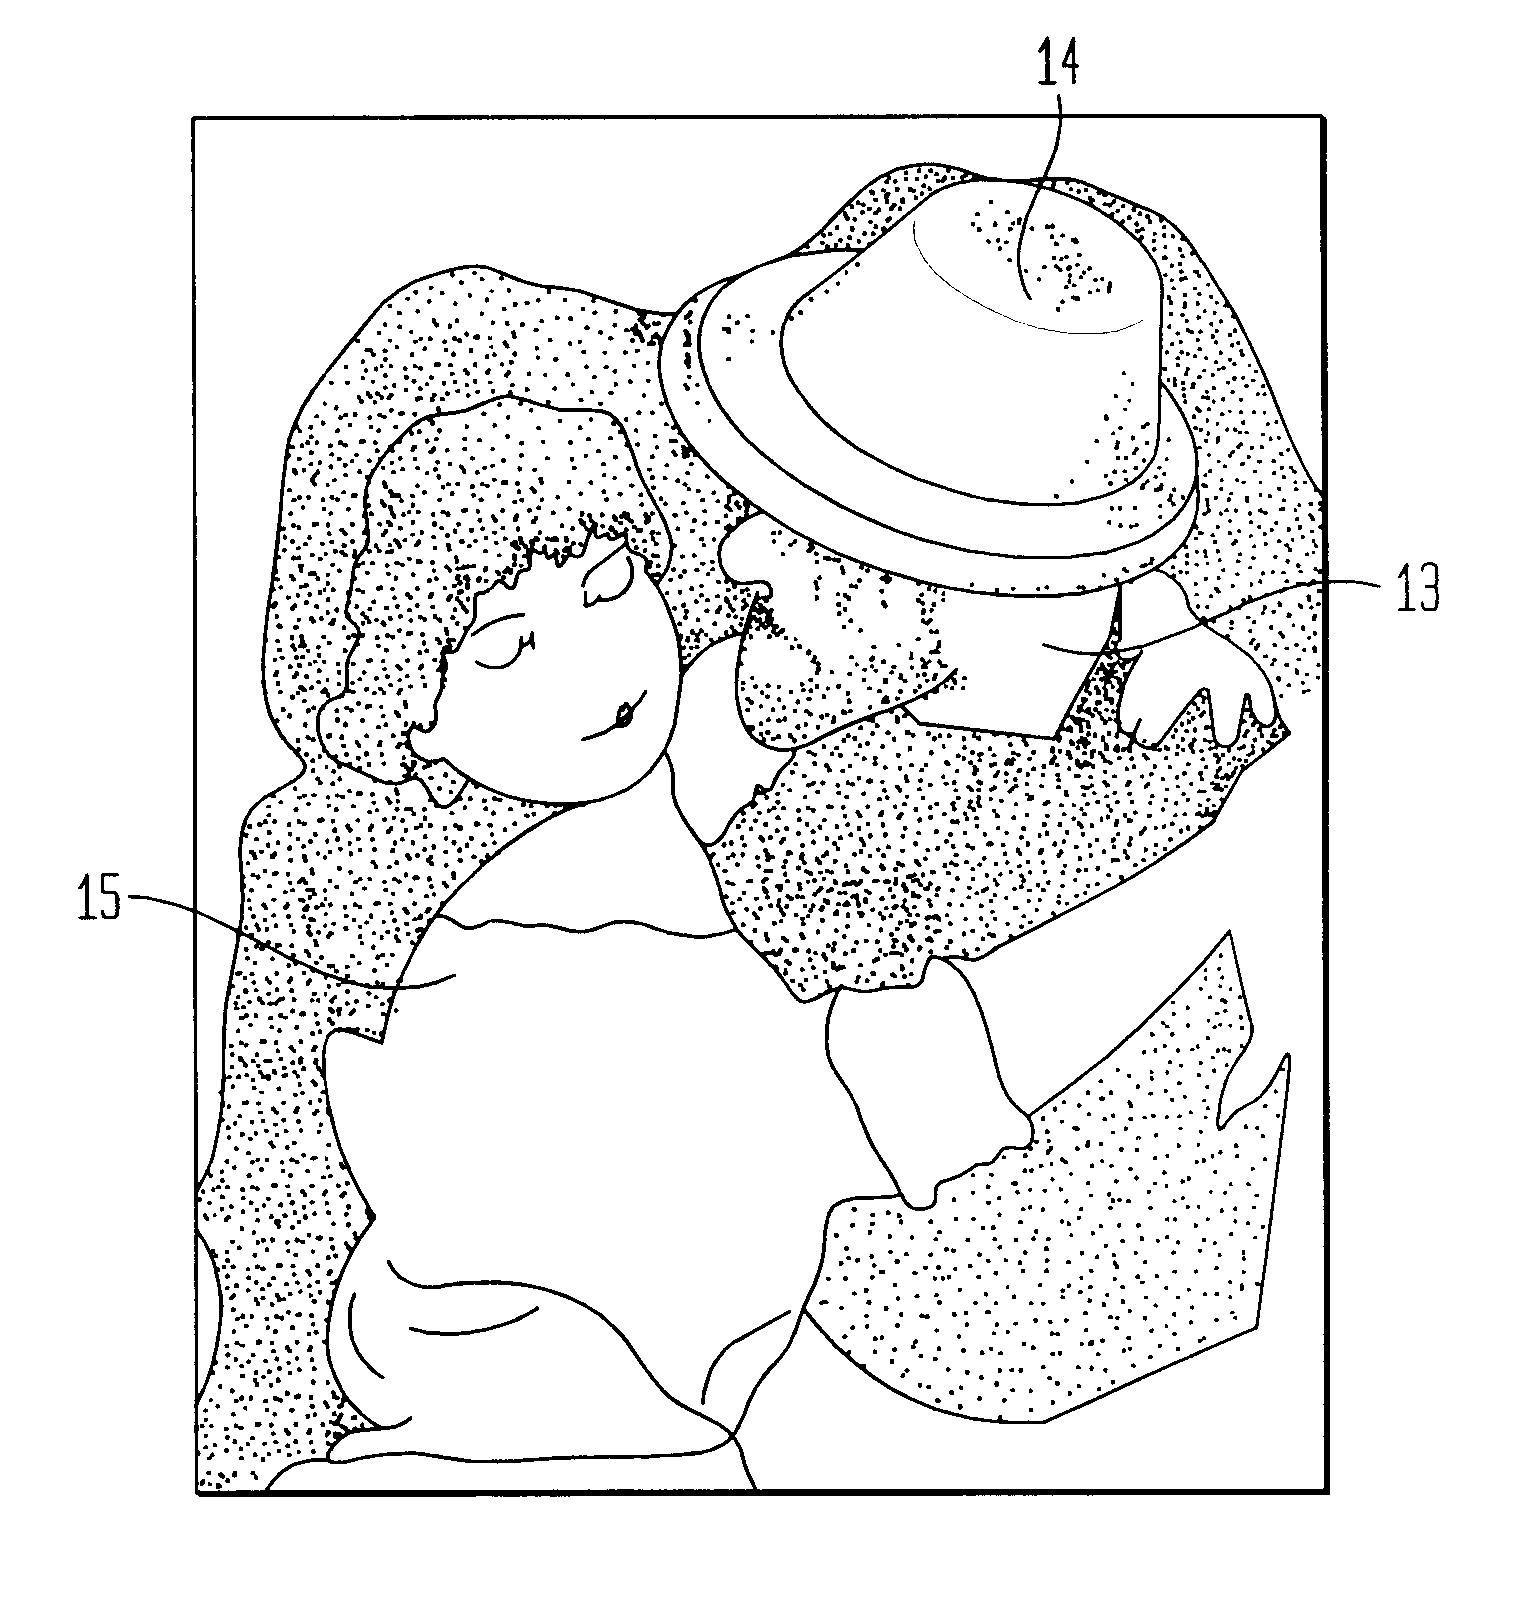 Computer system for converting a colored picture into a color-in line drawing